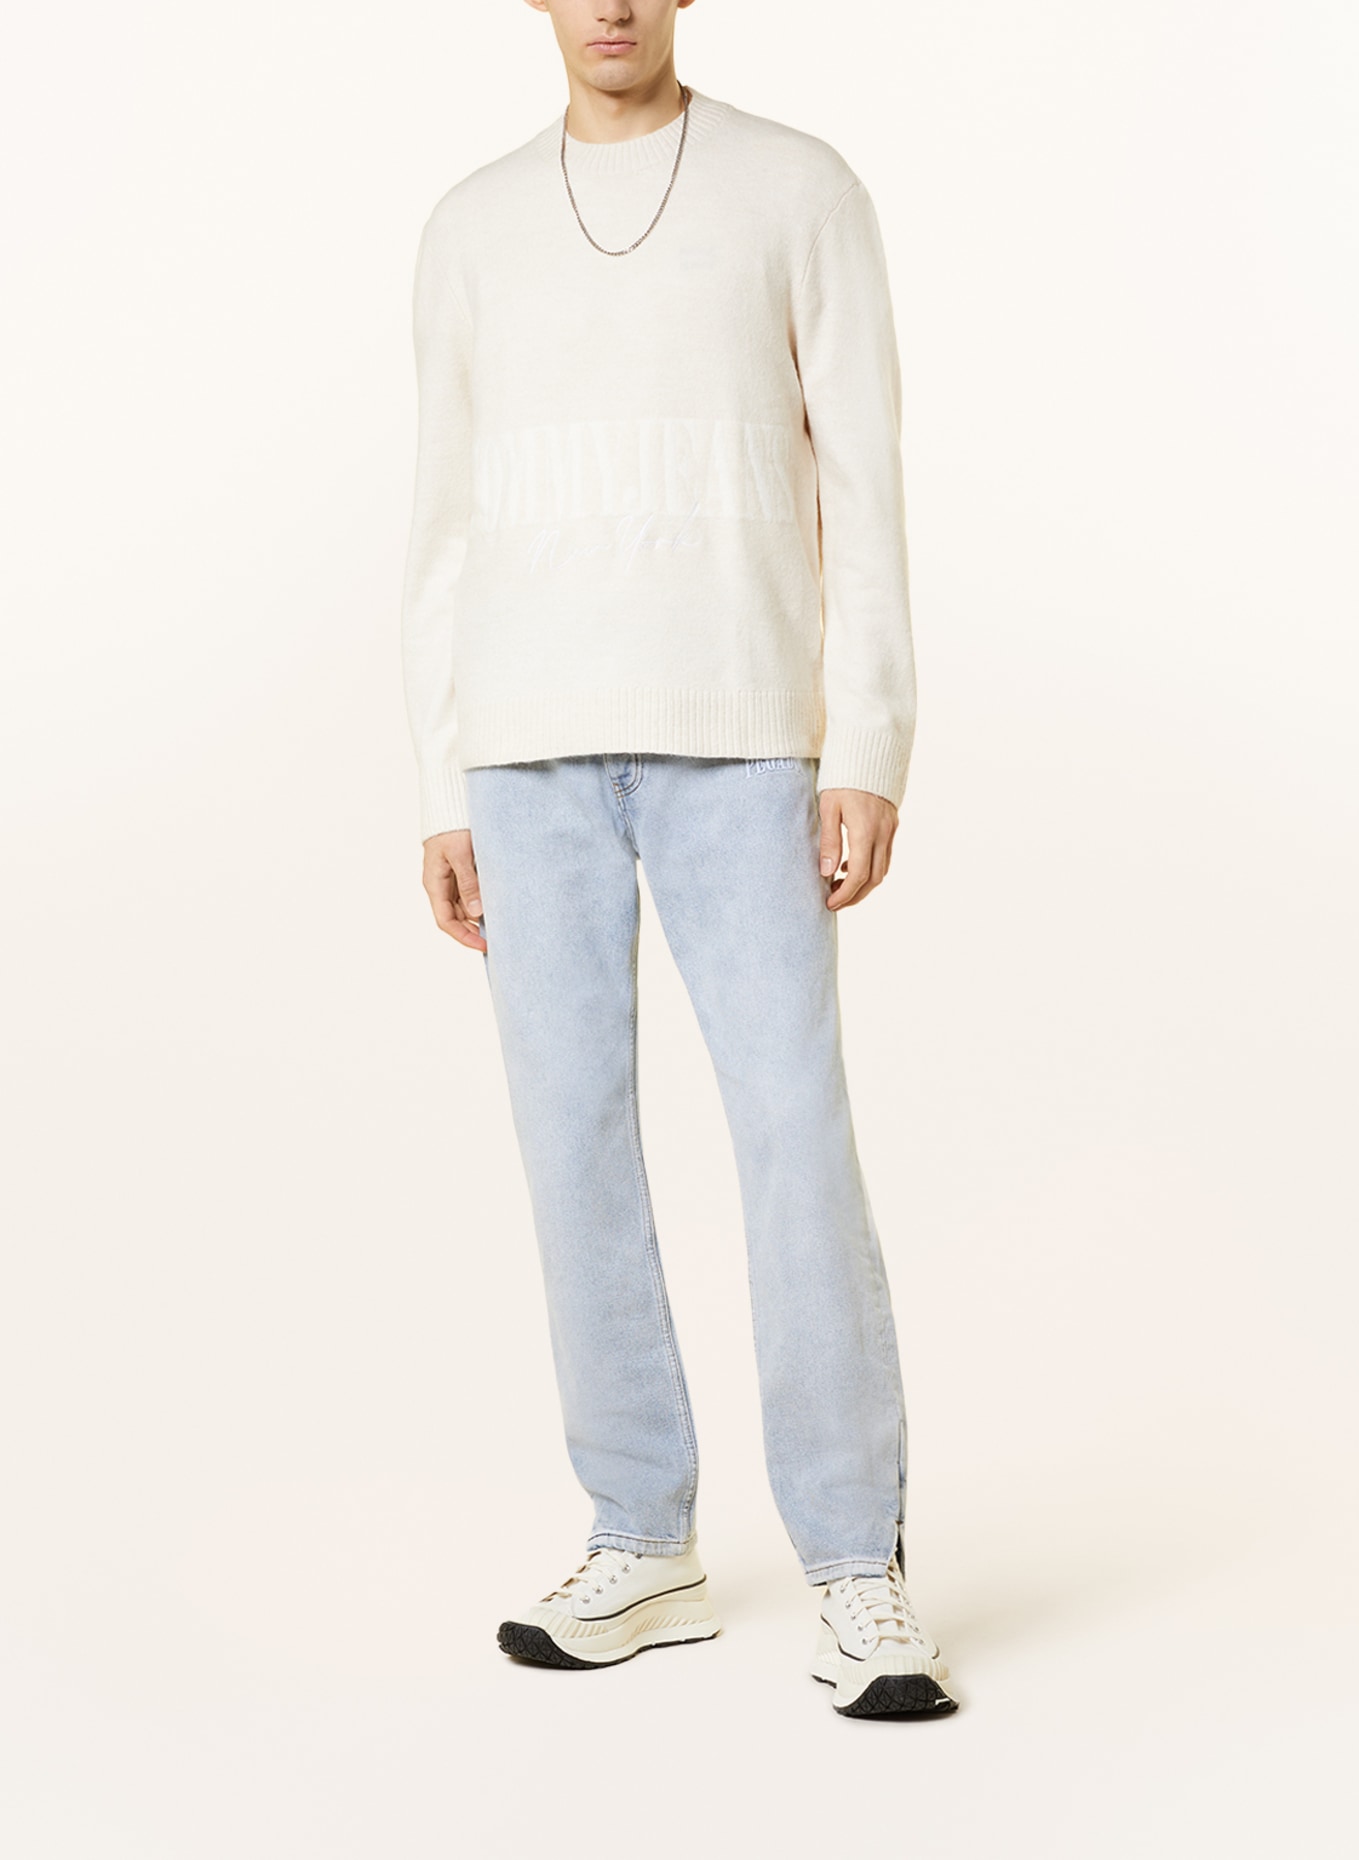 TOMMY JEANS Pullover, Farbe: WEISS (Bild 2)